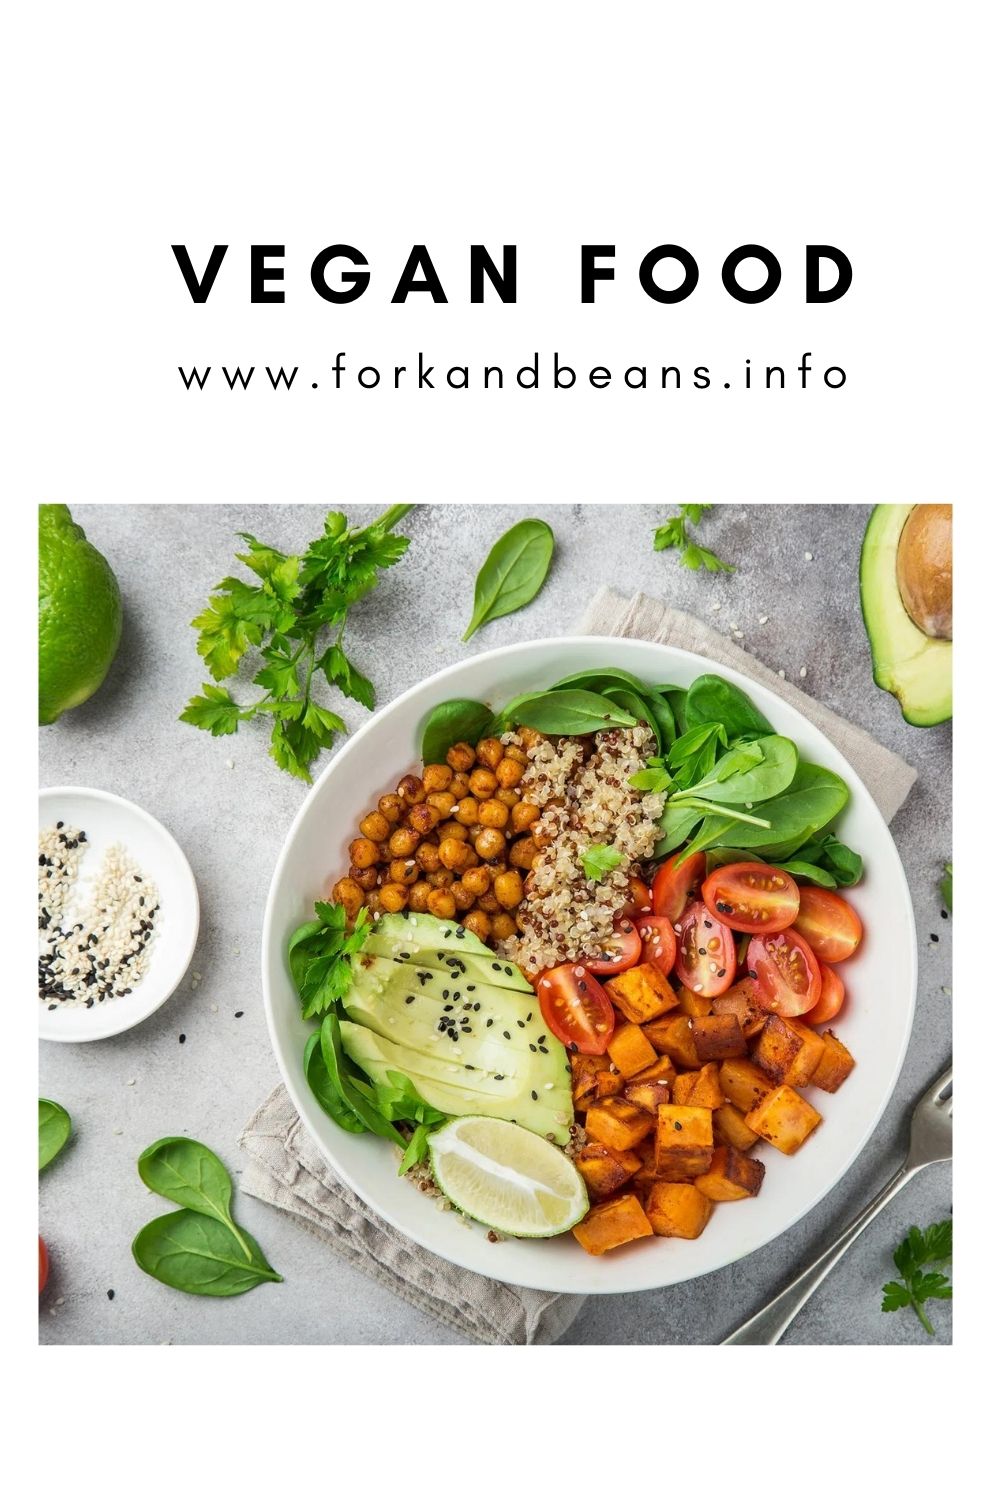 The difference between a vegan and a plant-based diet